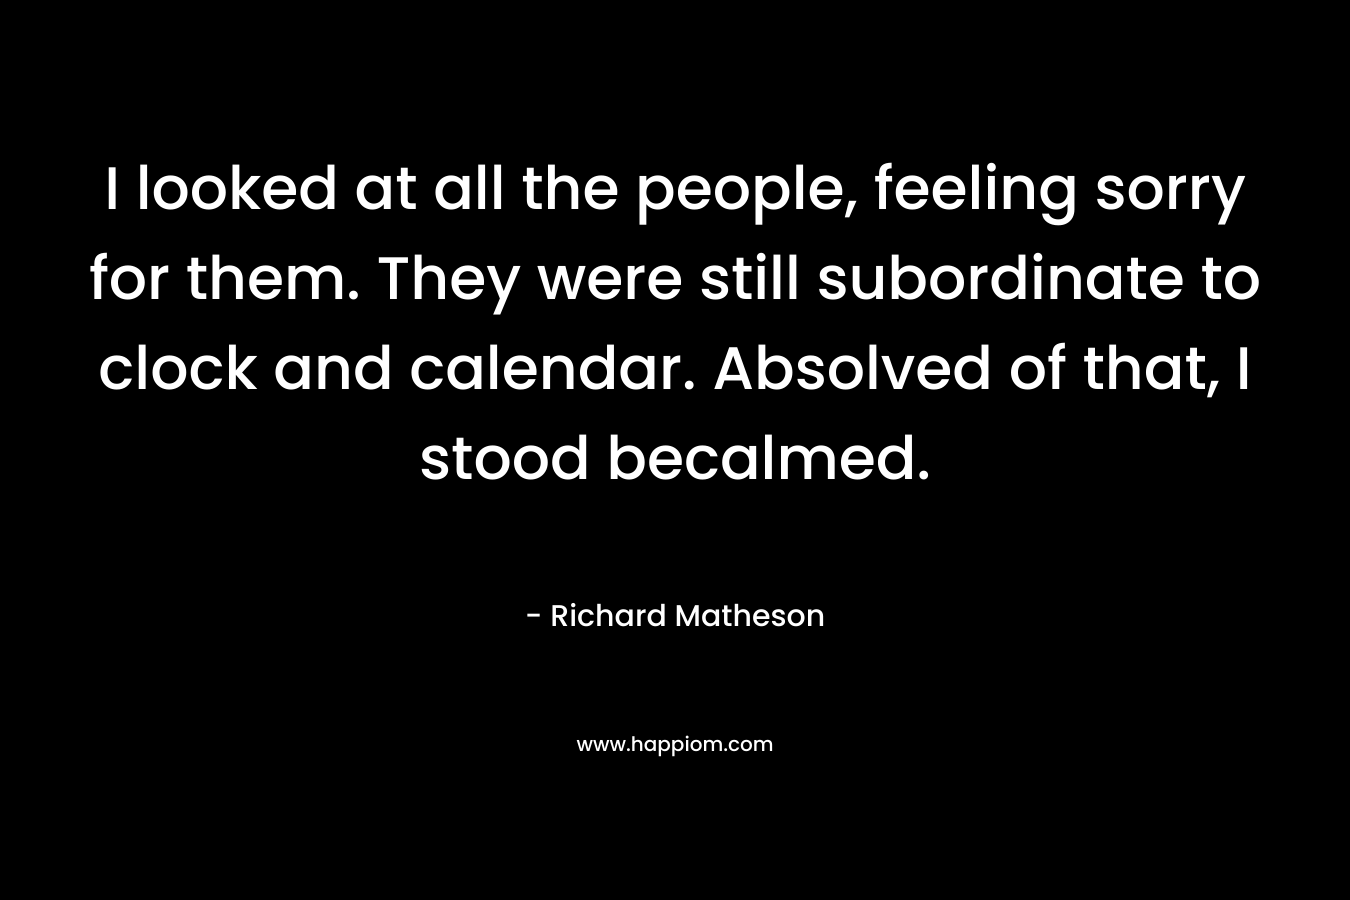 I looked at all the people, feeling sorry for them. They were still subordinate to clock and calendar. Absolved of that, I stood becalmed. – Richard Matheson